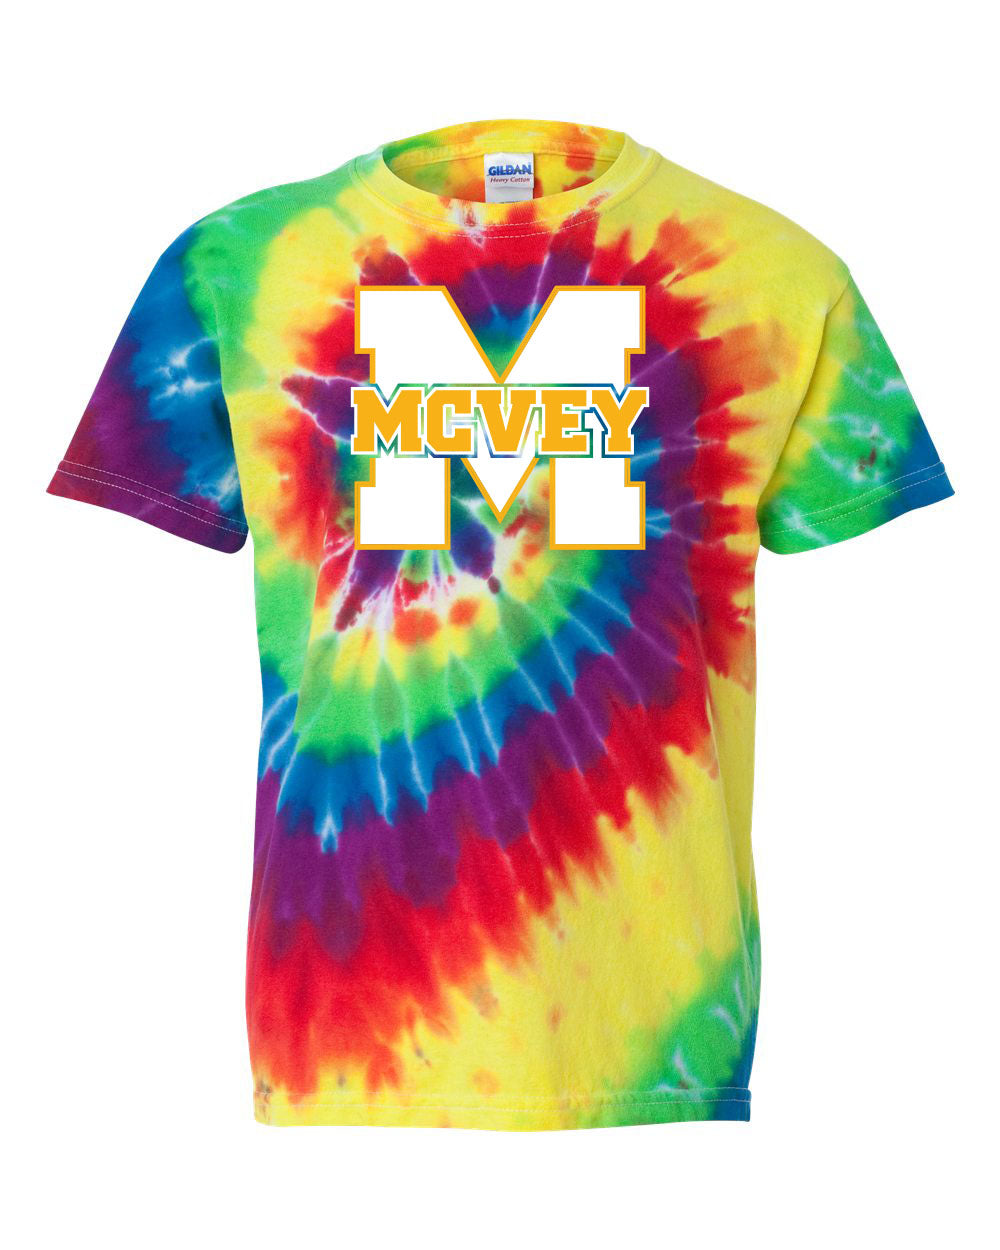 New! MCVEY Tie Dye Youth/Adult T-Shirt (additional colors available)